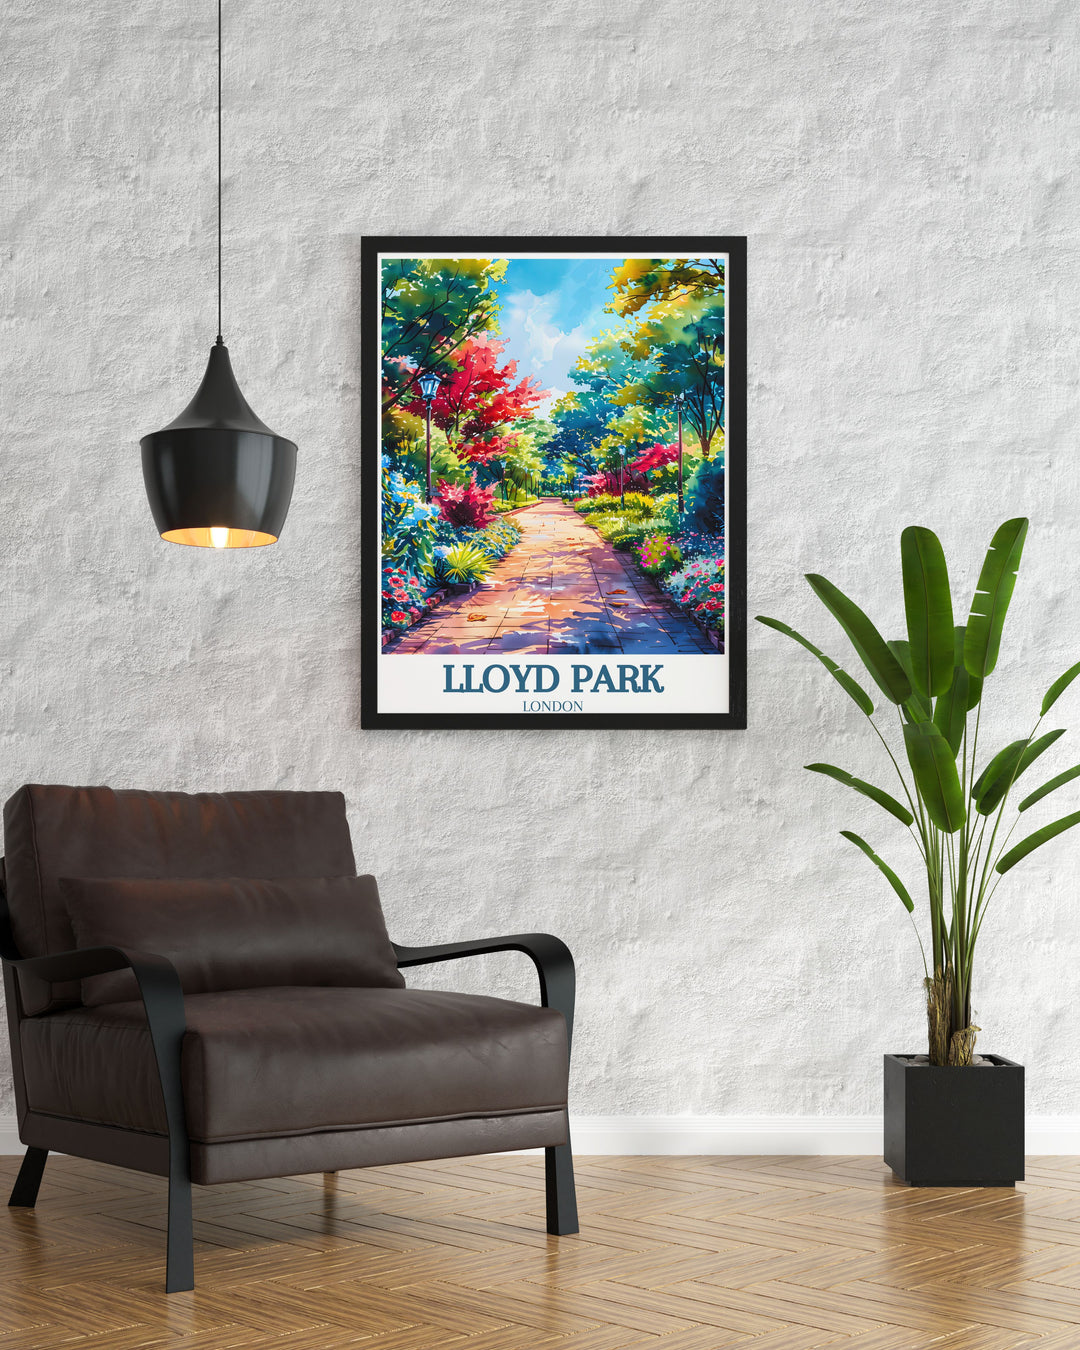 Lloyd Park poster showcasing the stunning rose garden in East London. Celebrate Walthamstows artistic heritage with this elegant print. Ideal for London museums or personal home decor. A timeless piece of rose garden artwork for any collection.